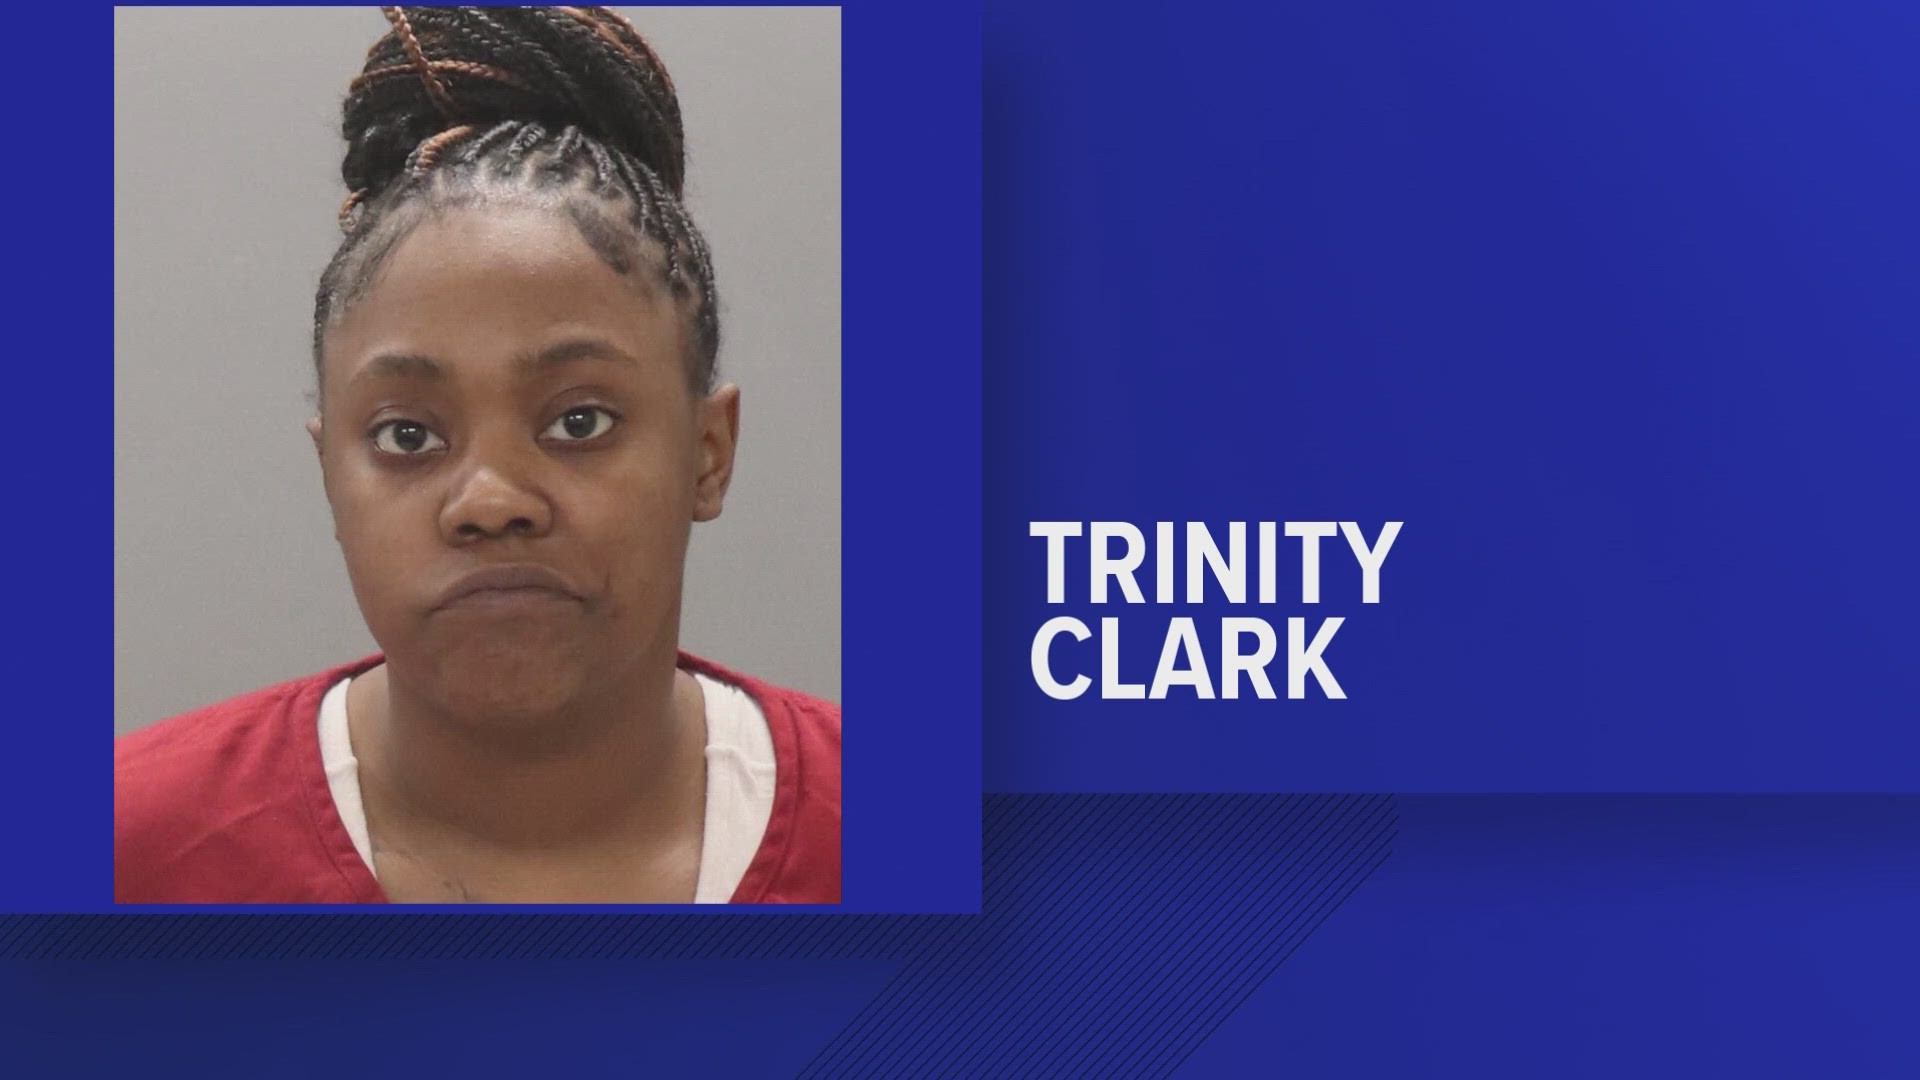 Trinity Clark is awaiting trial on a charge that her participation in a drag-racing crash caused the death of Michael Williams in January 2023.